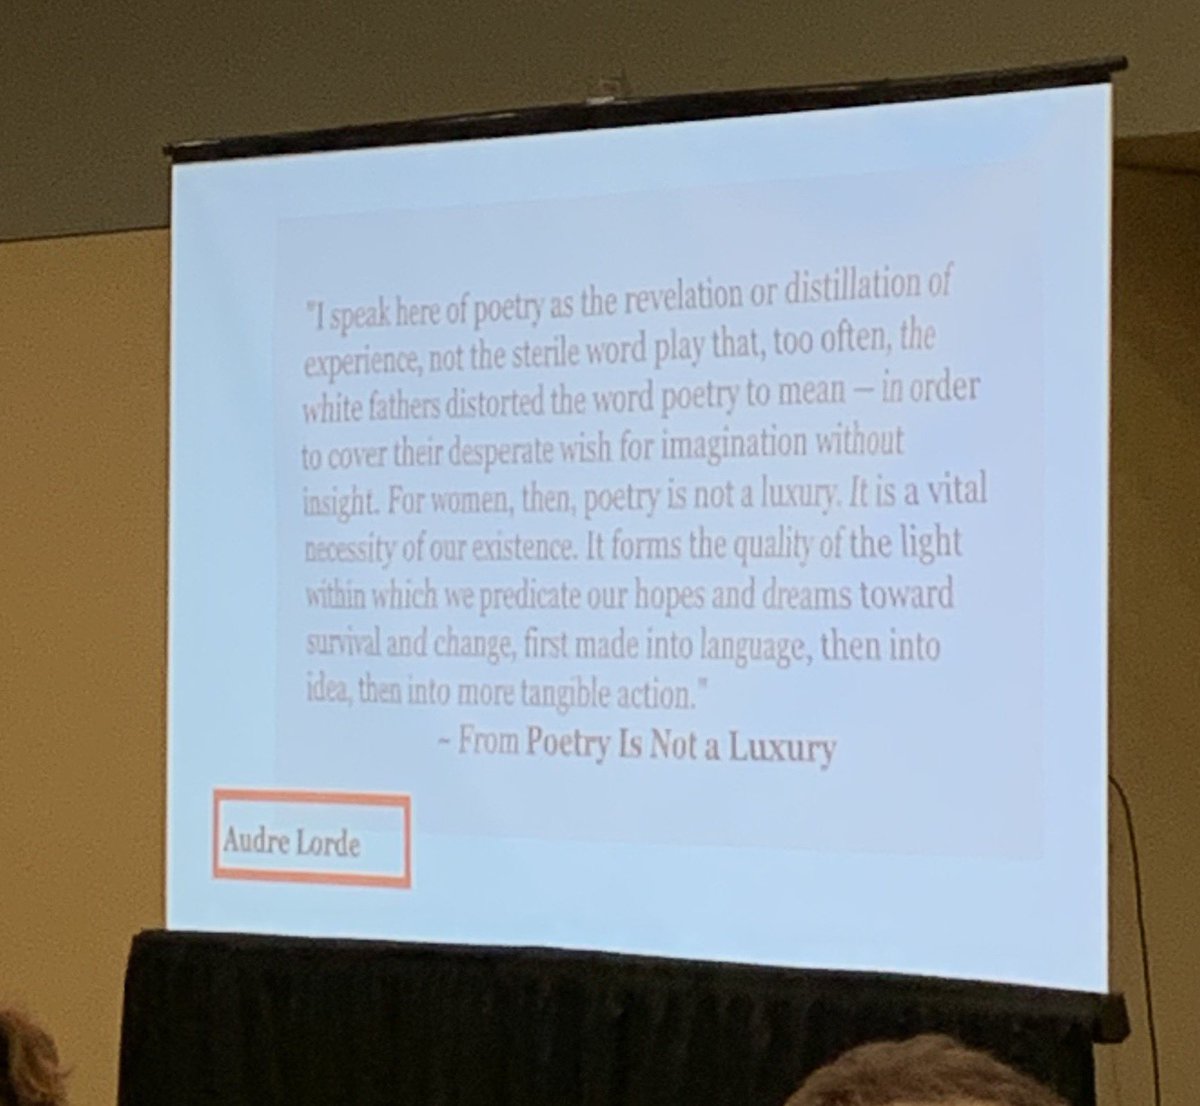 Session closes with a reading from Audre Lorde’s “Poetry is not a Luxury”  #NCTE19 – at  Baltimore Convention Center